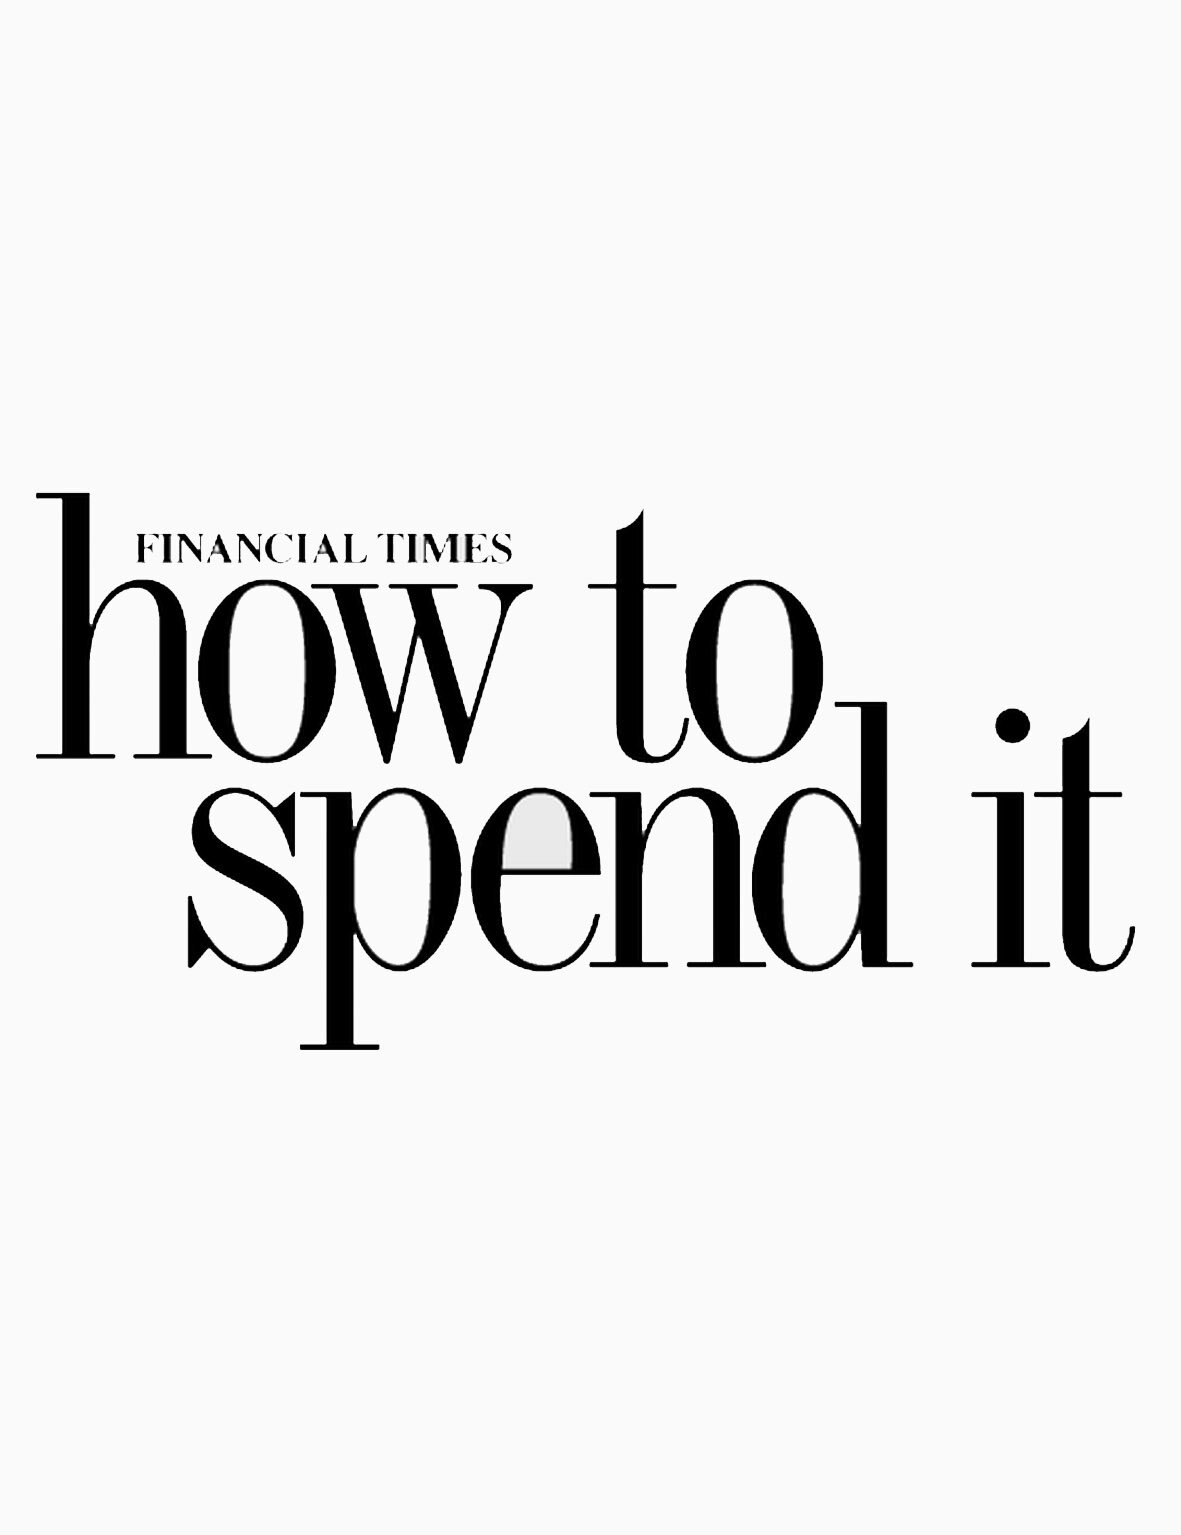 HOW TO SPEND IT, NOV 2013